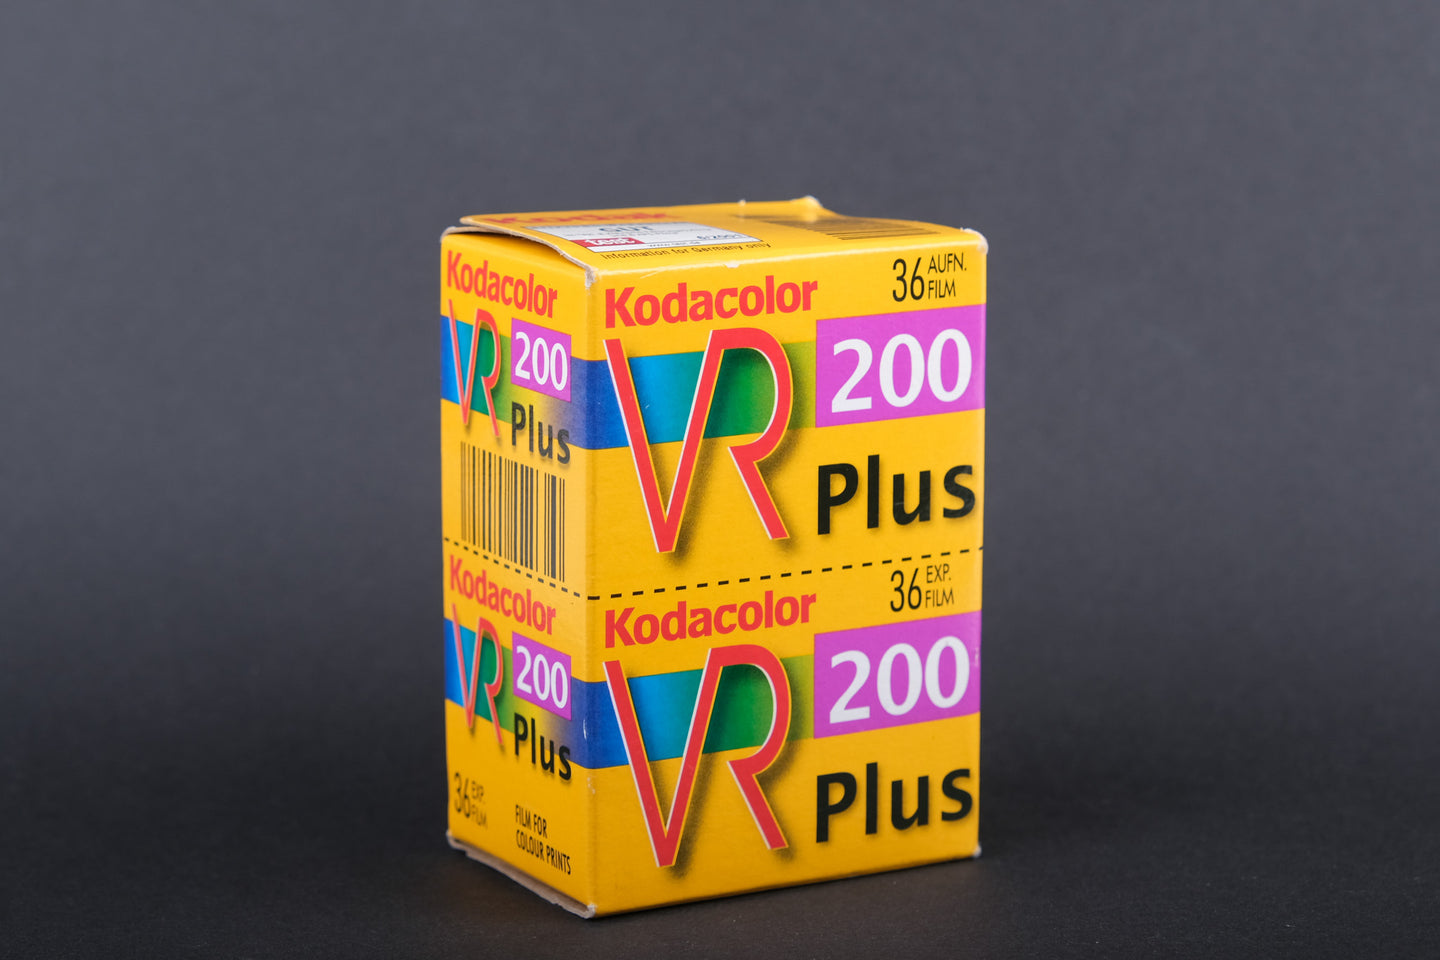 Kodacolor VR Plus 200 35mm Expired Film 36 exp